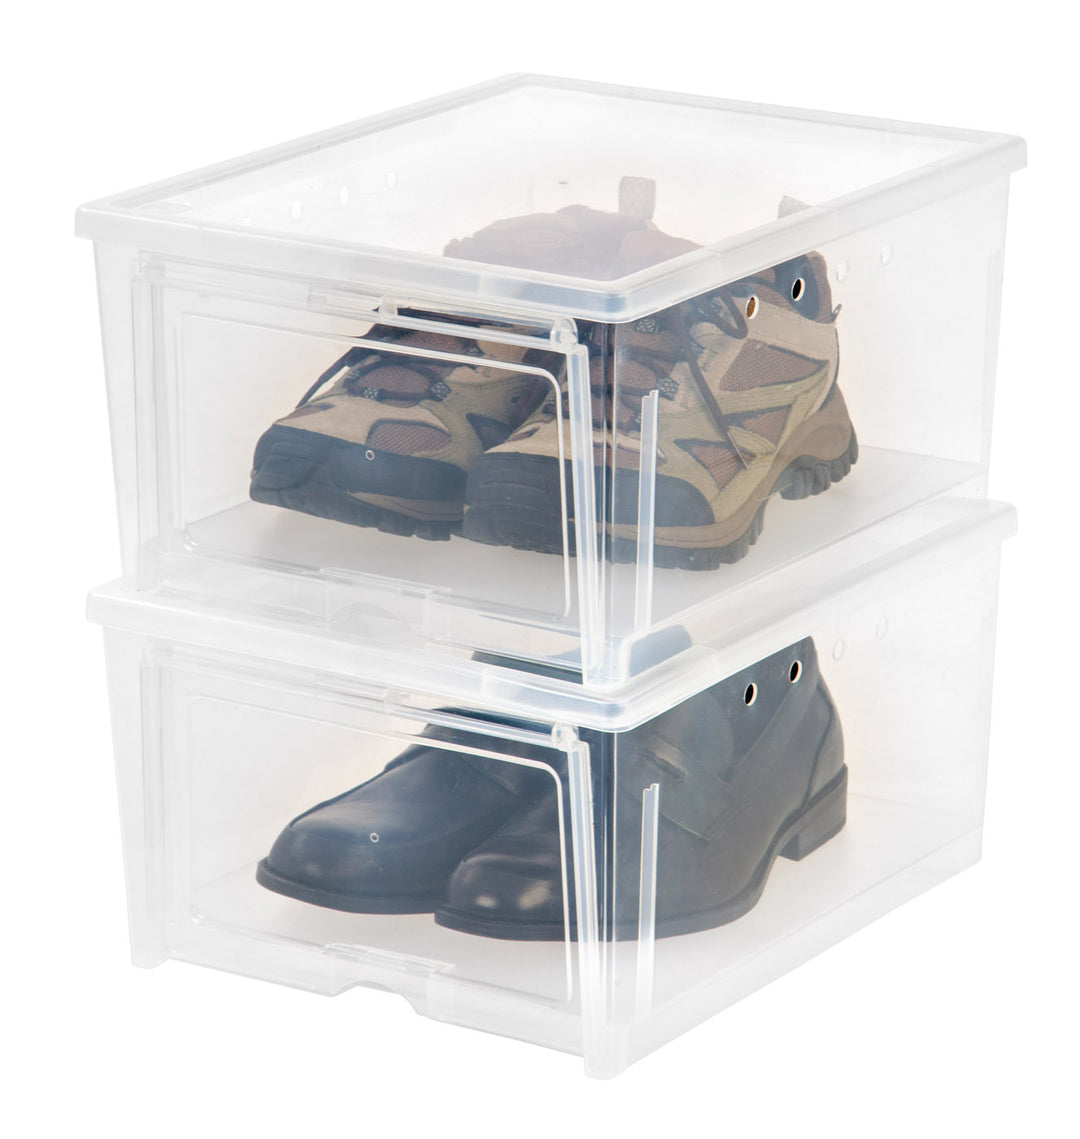 Easy Access Drop Front Shoe Box - 2 Pack, Wide - IRIS USA, Inc.